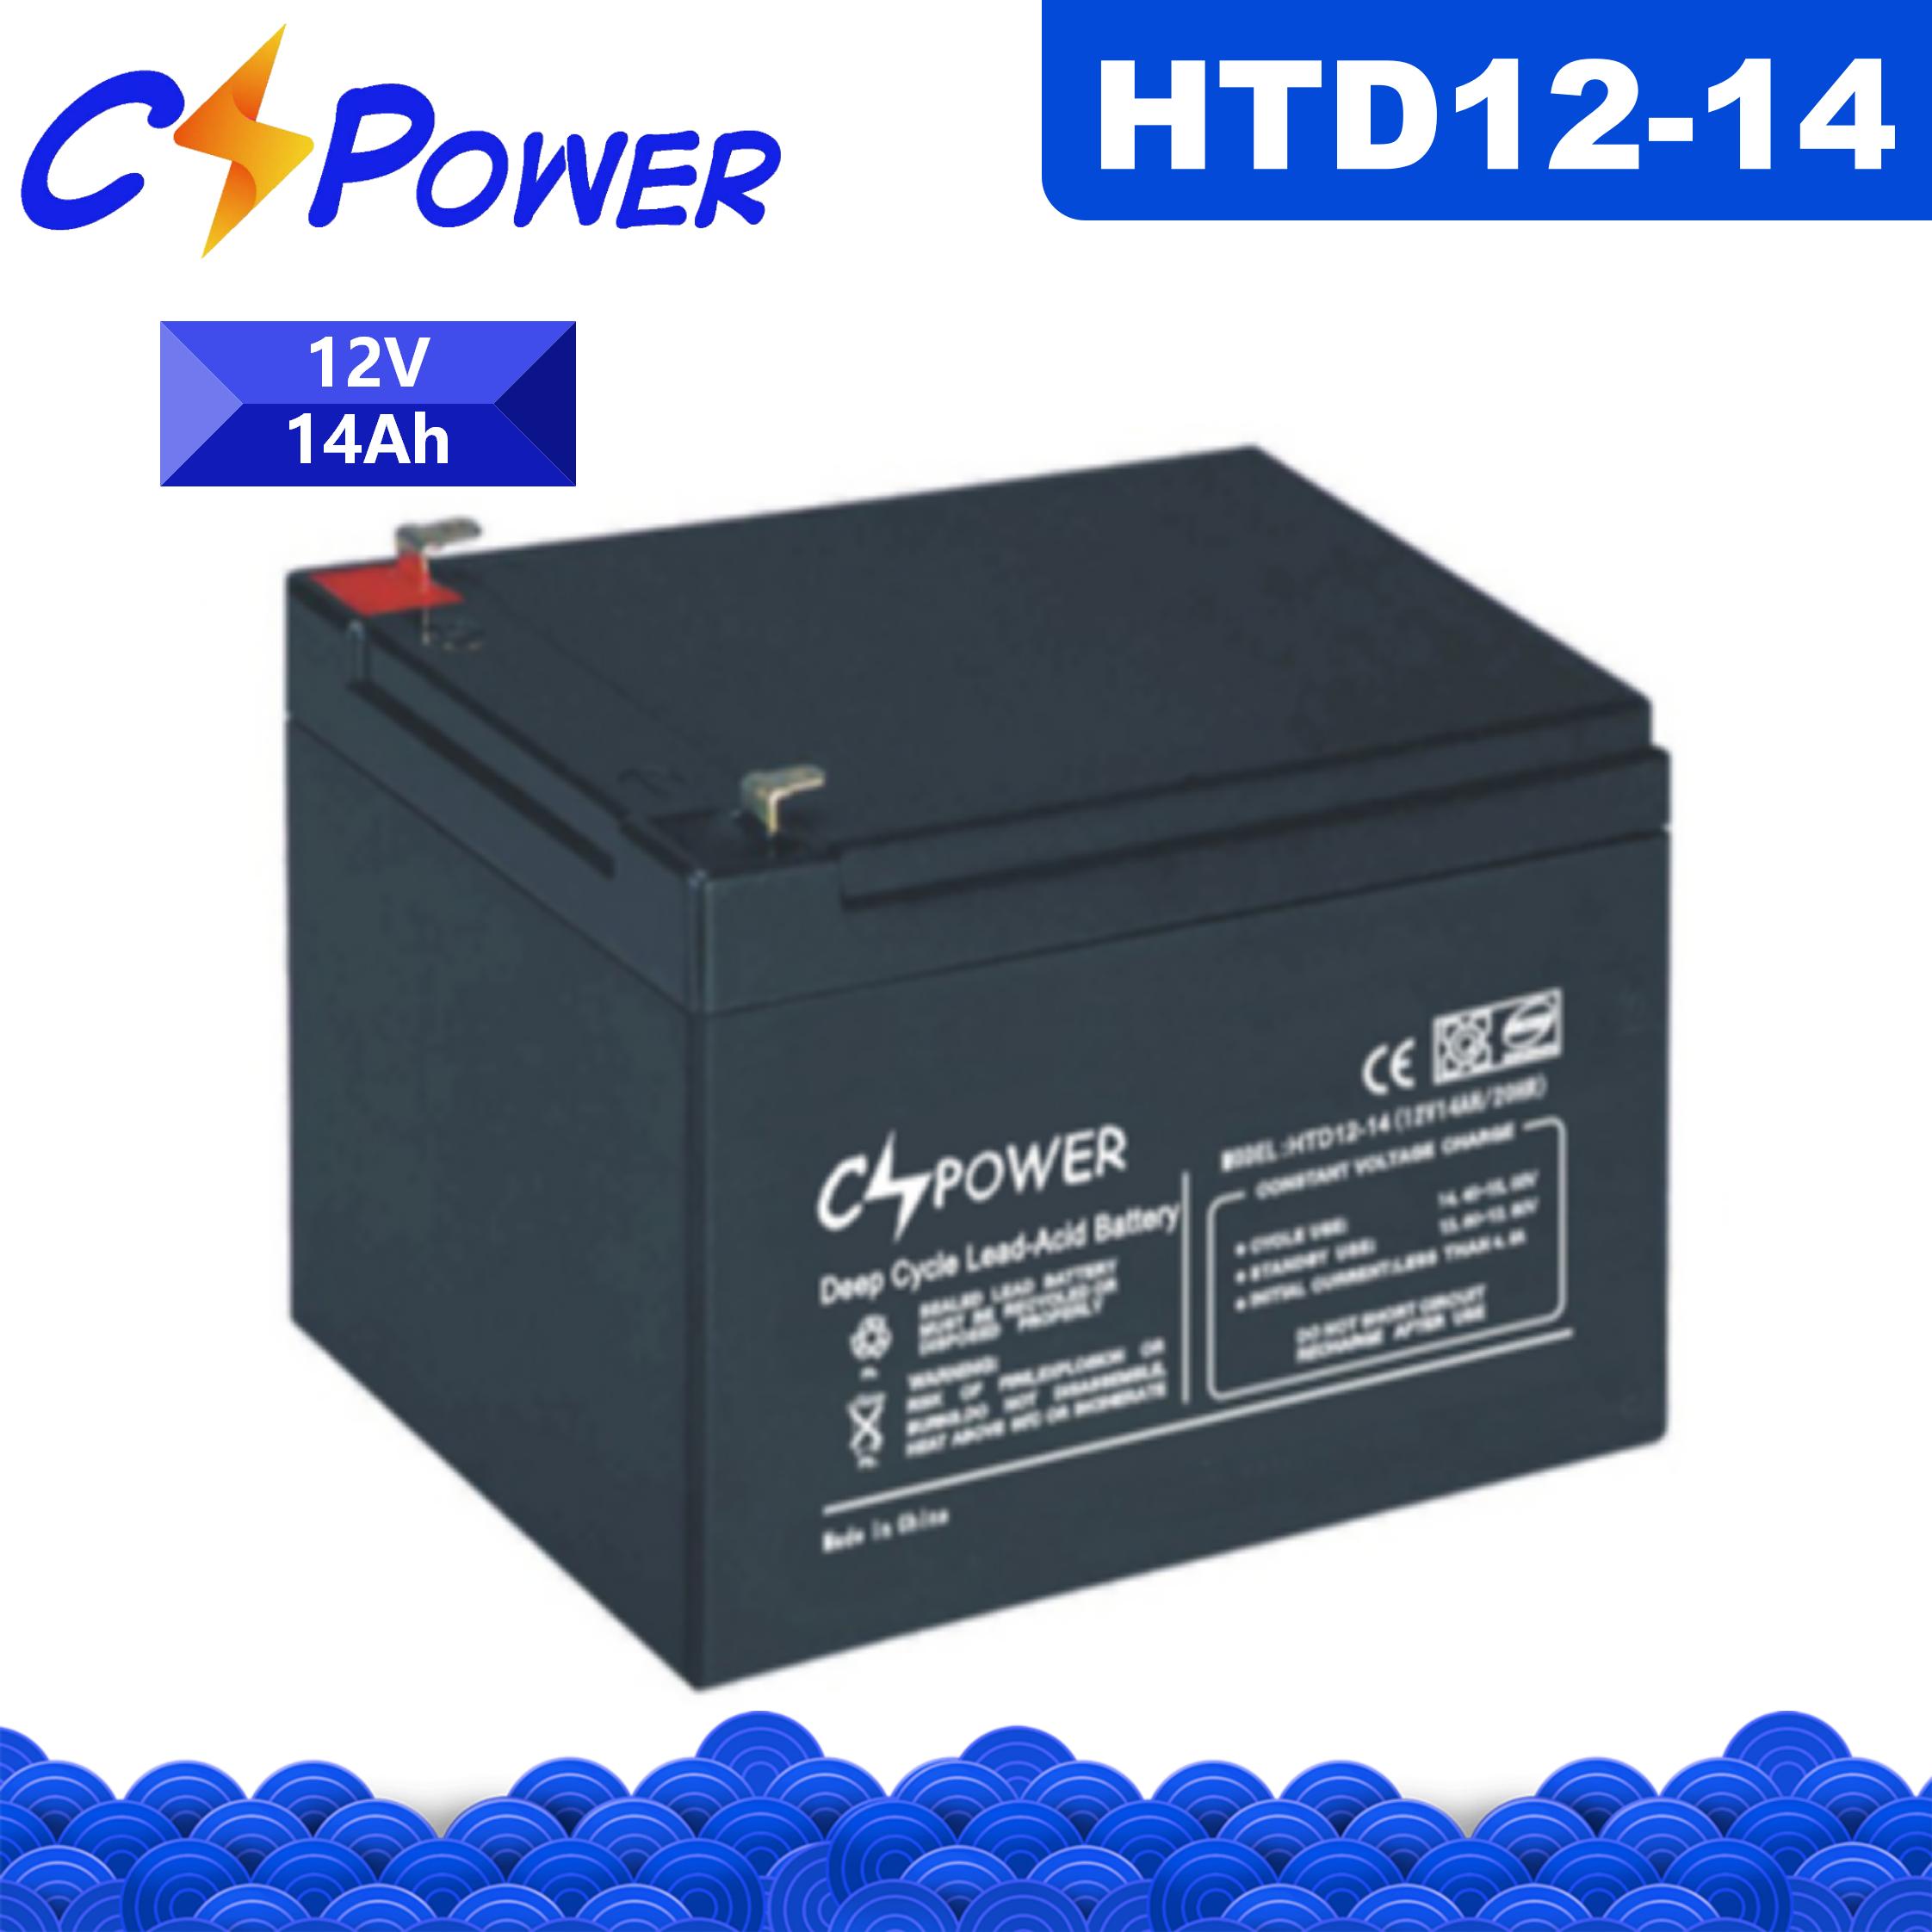 CSPower HTD12-14 Deep Cycle VRLA AGM Battery